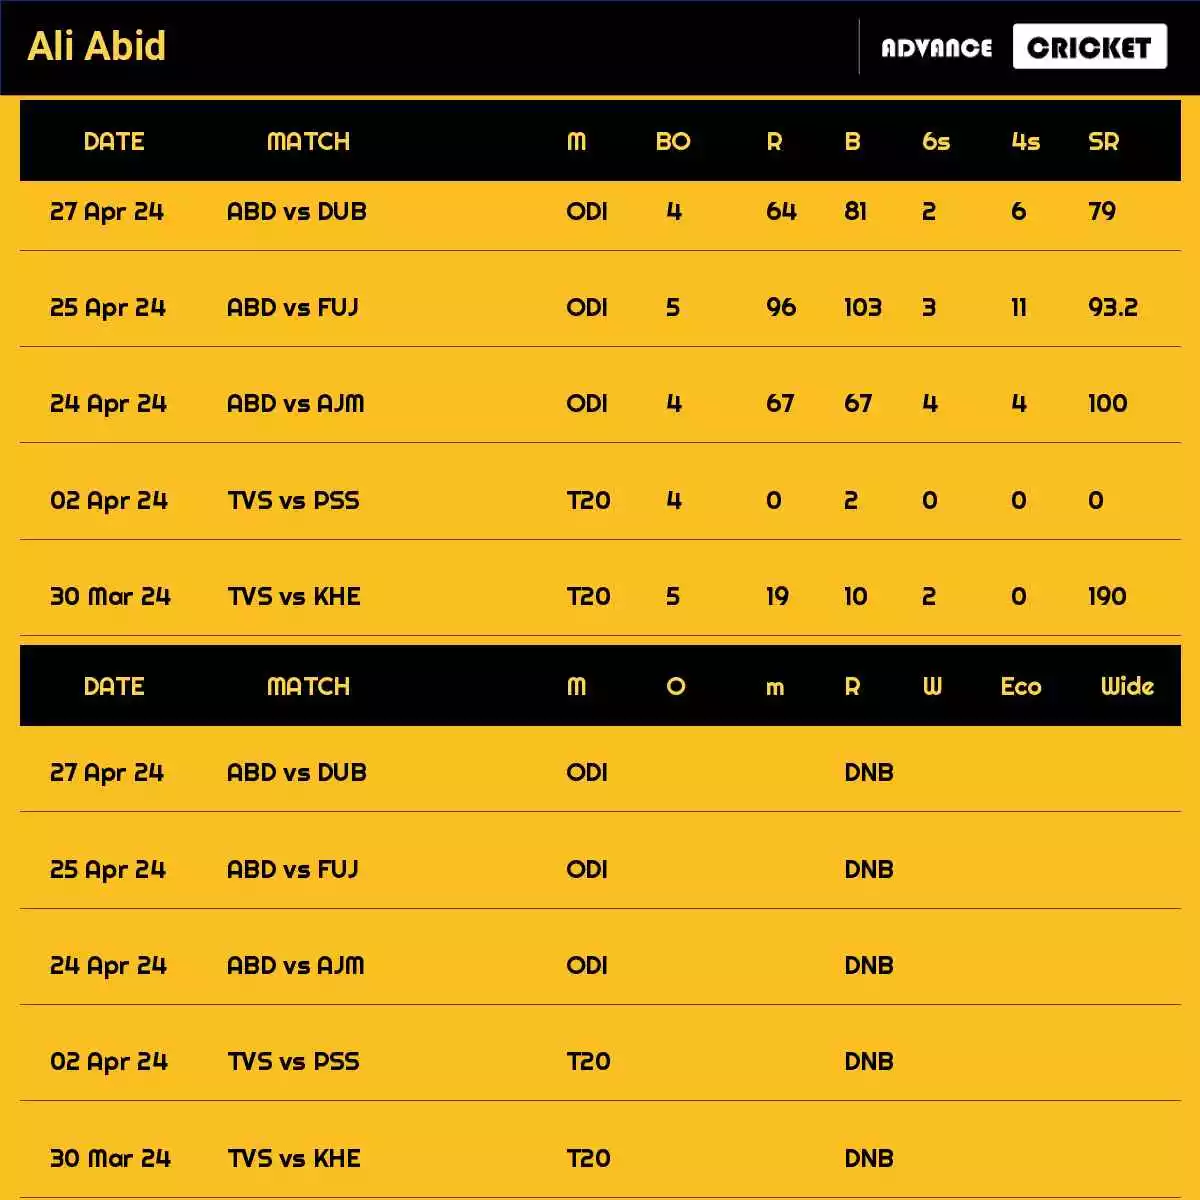 Ali Abid Recent Matches Details Date Wise